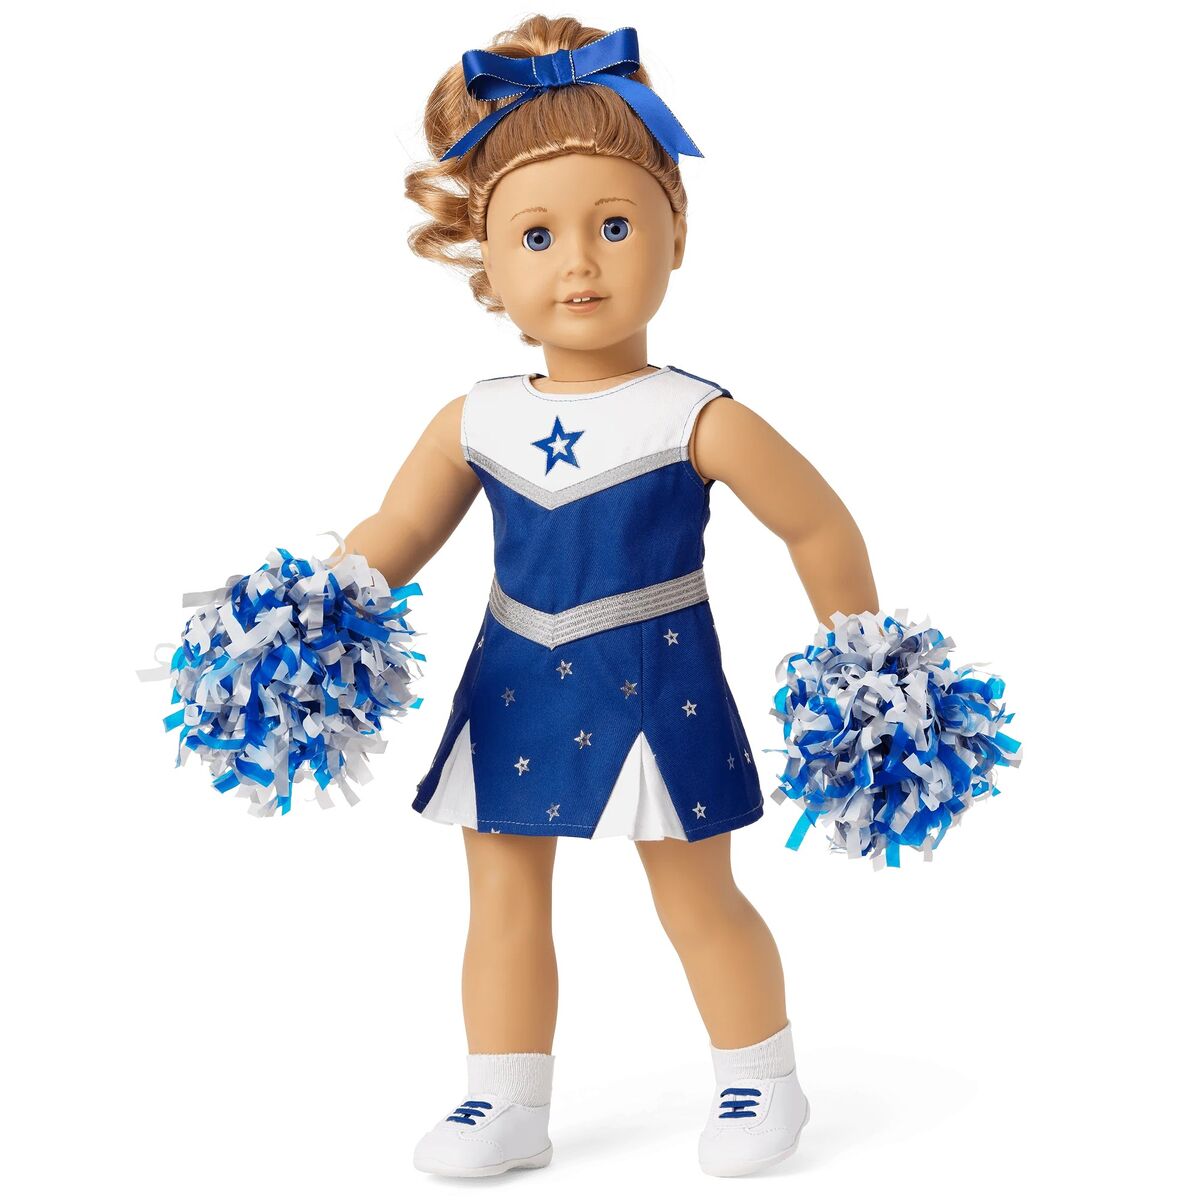 Girls Cheerleader Uniform Costume Outfit Dress Socks Match Pompoms✨GREAT  OUTFIT✨